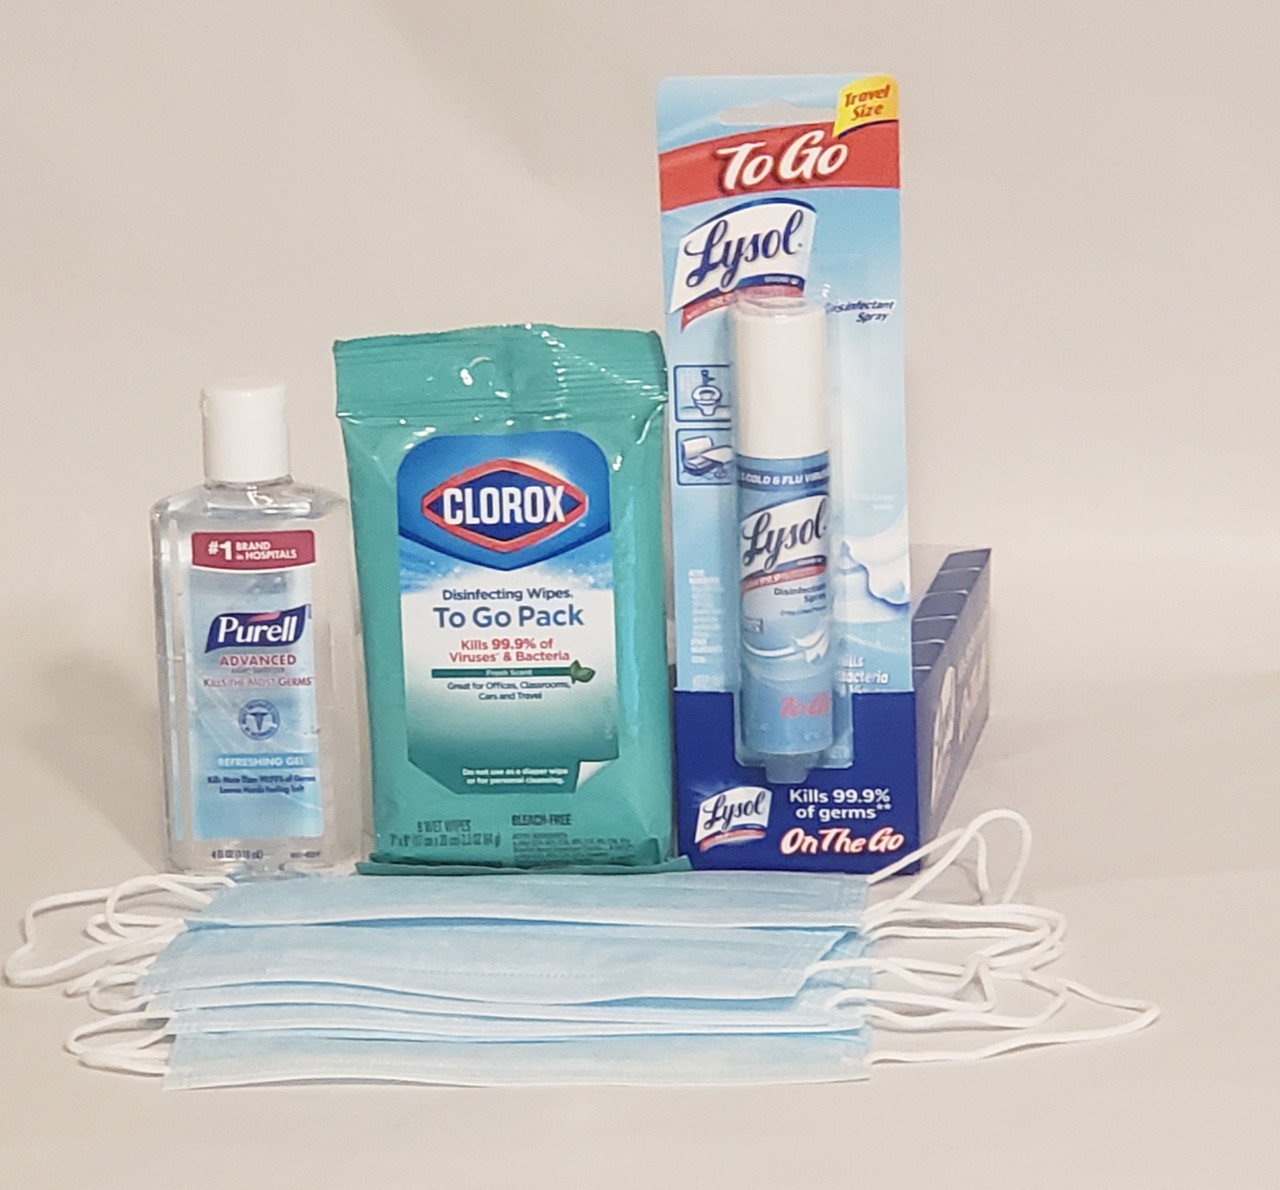 Disinfectant Wipes for Travel and On the Go